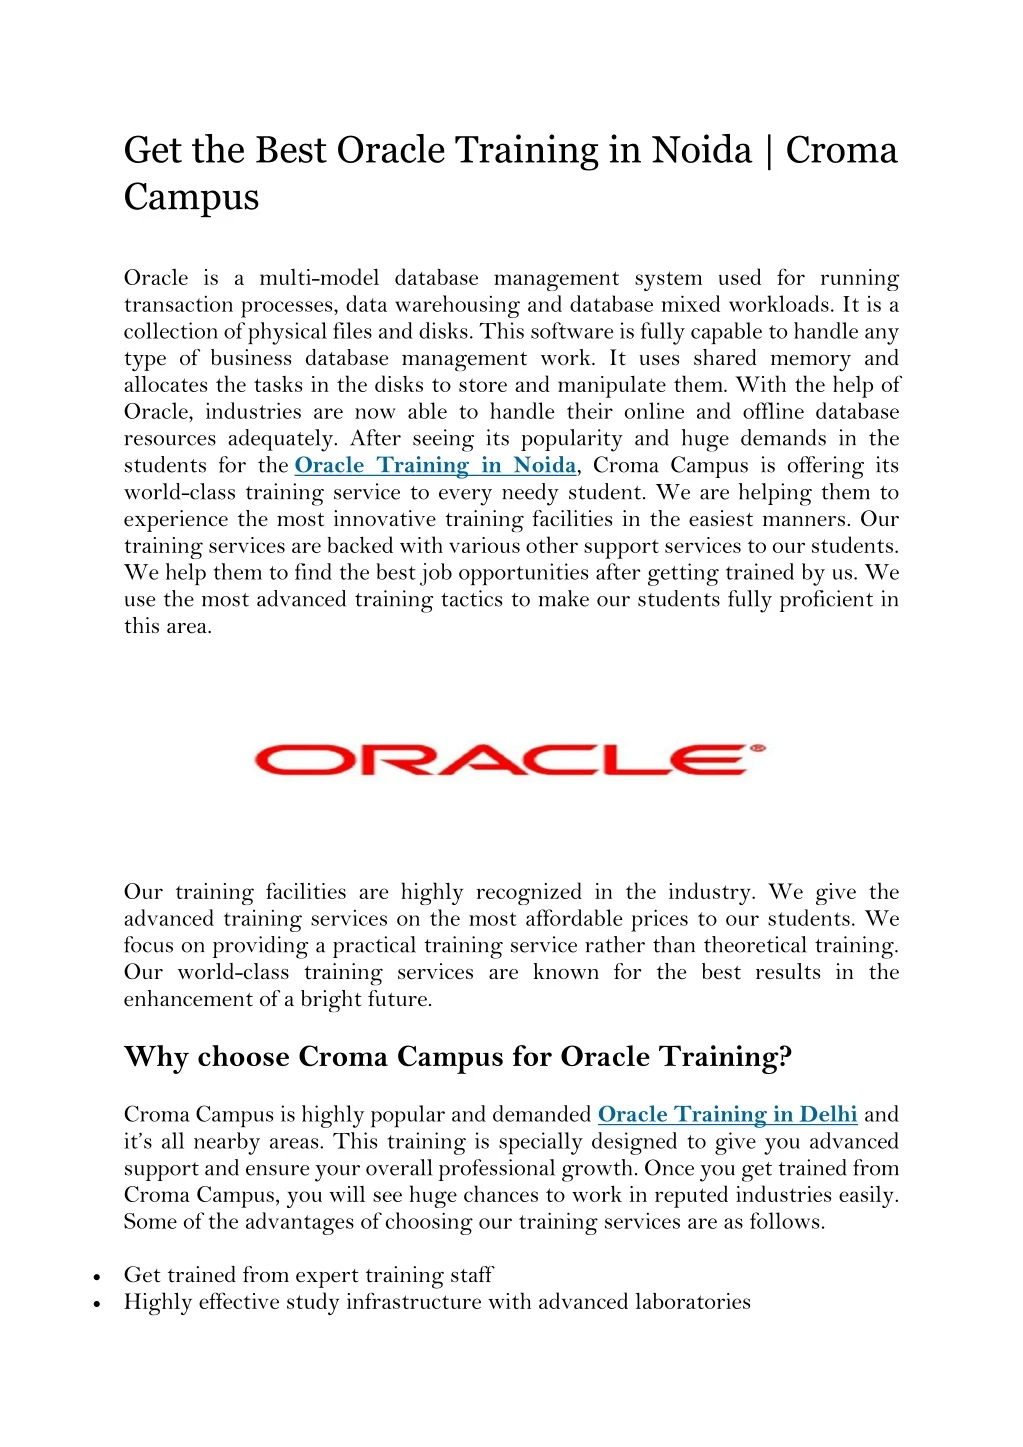 get the best oracle training in noida croma